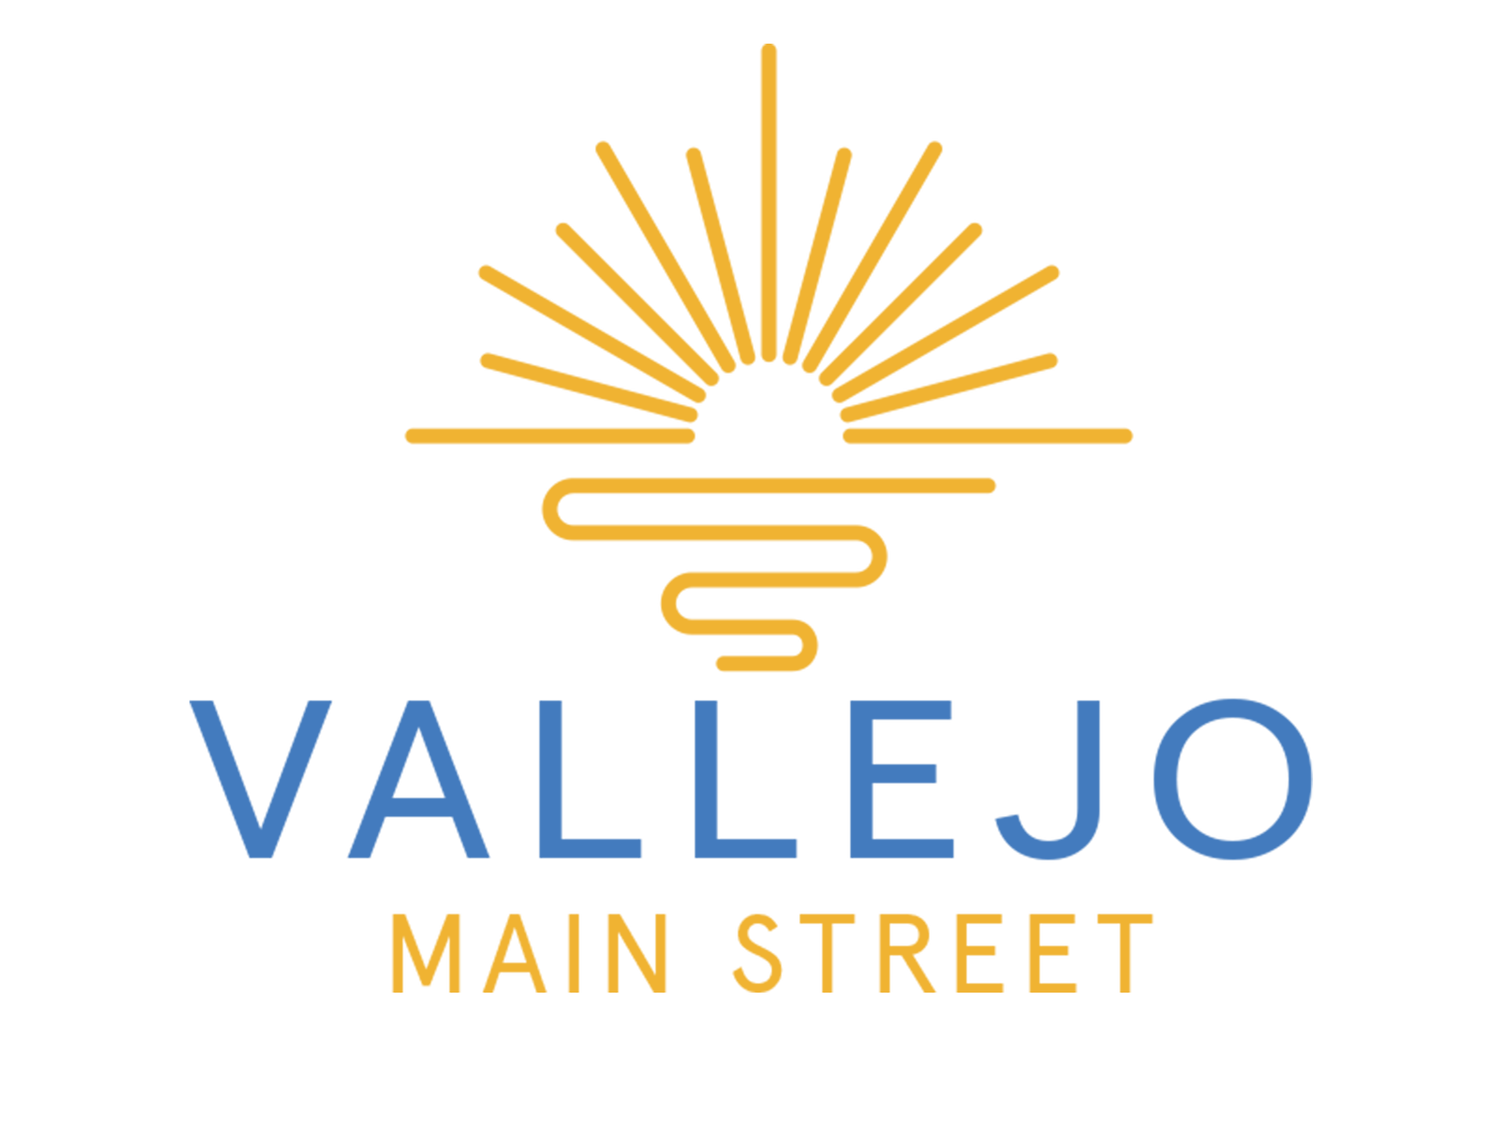 Vallejo Main Street - The Soul of the Bay